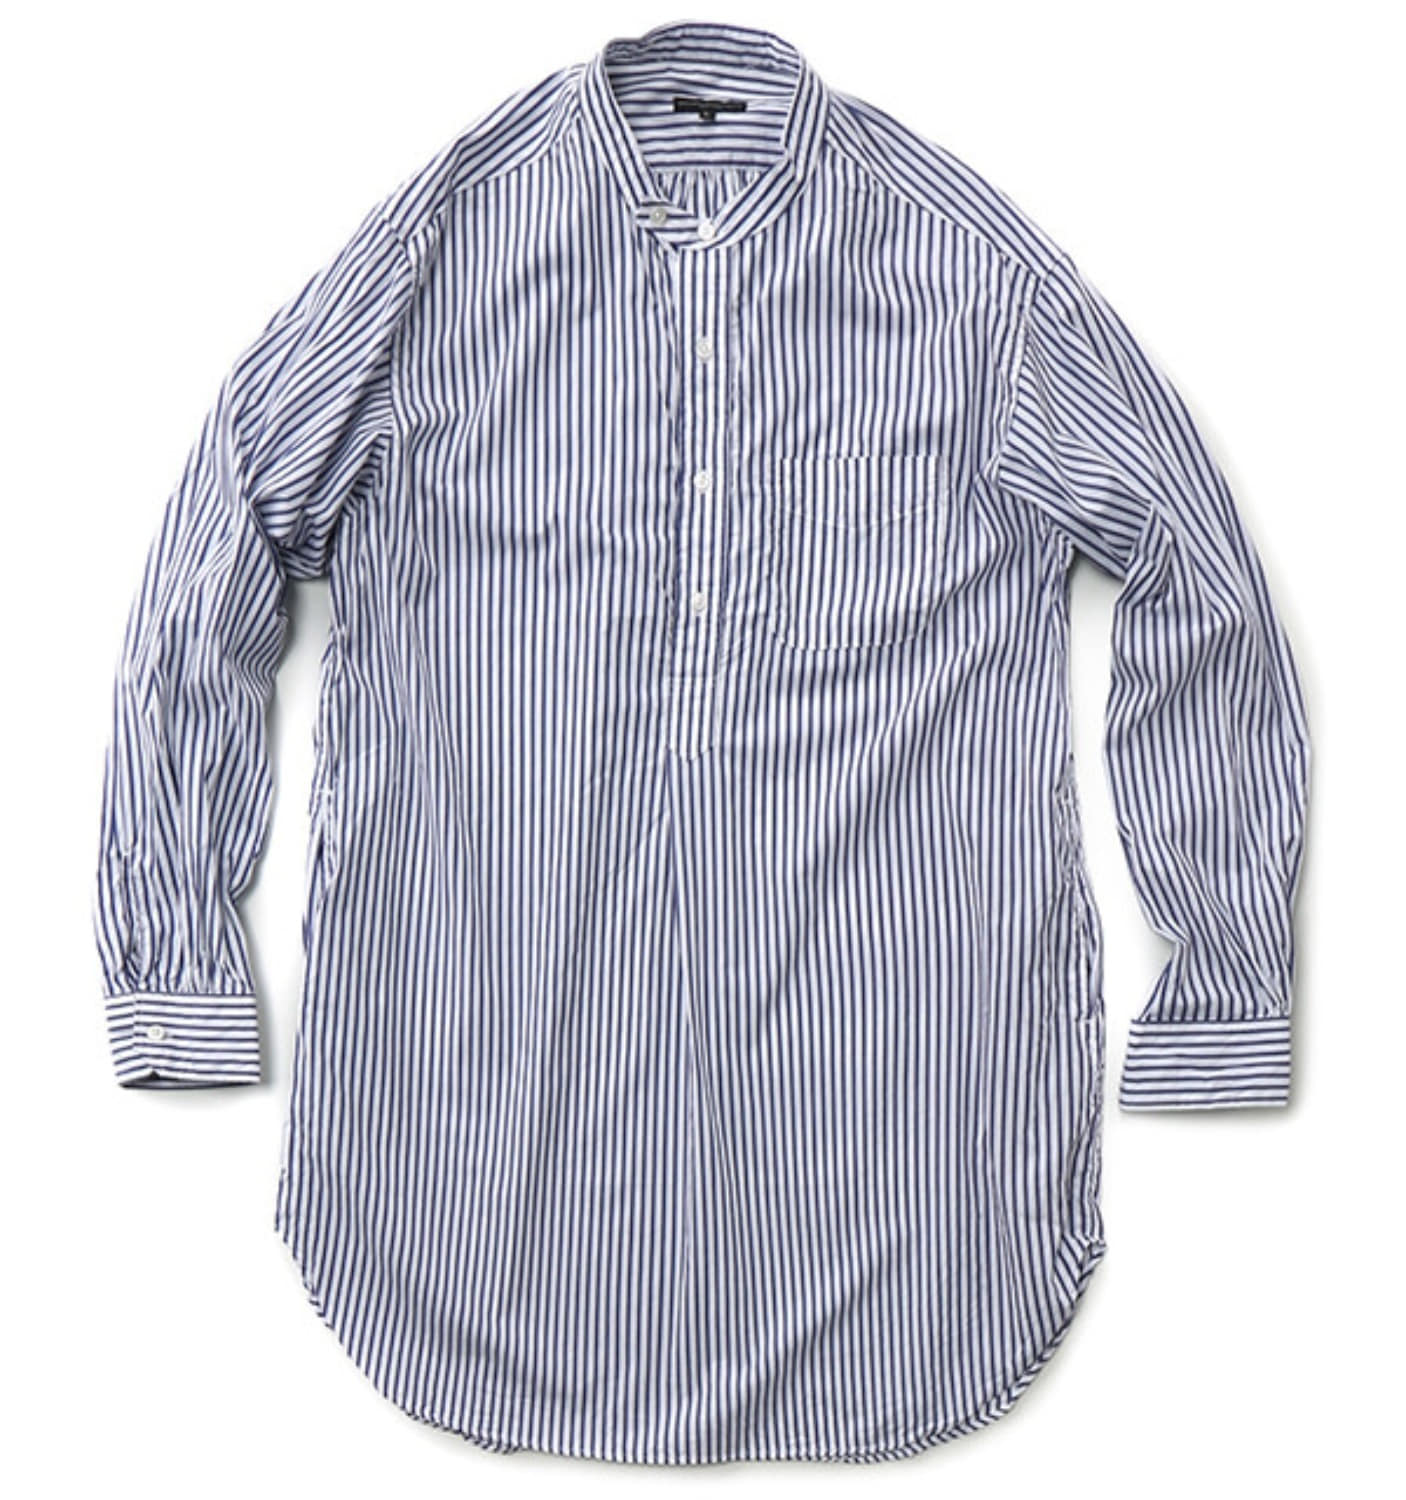 BANDED COLLAR SHIRT BLUE/WHITE WIDE STRIPE